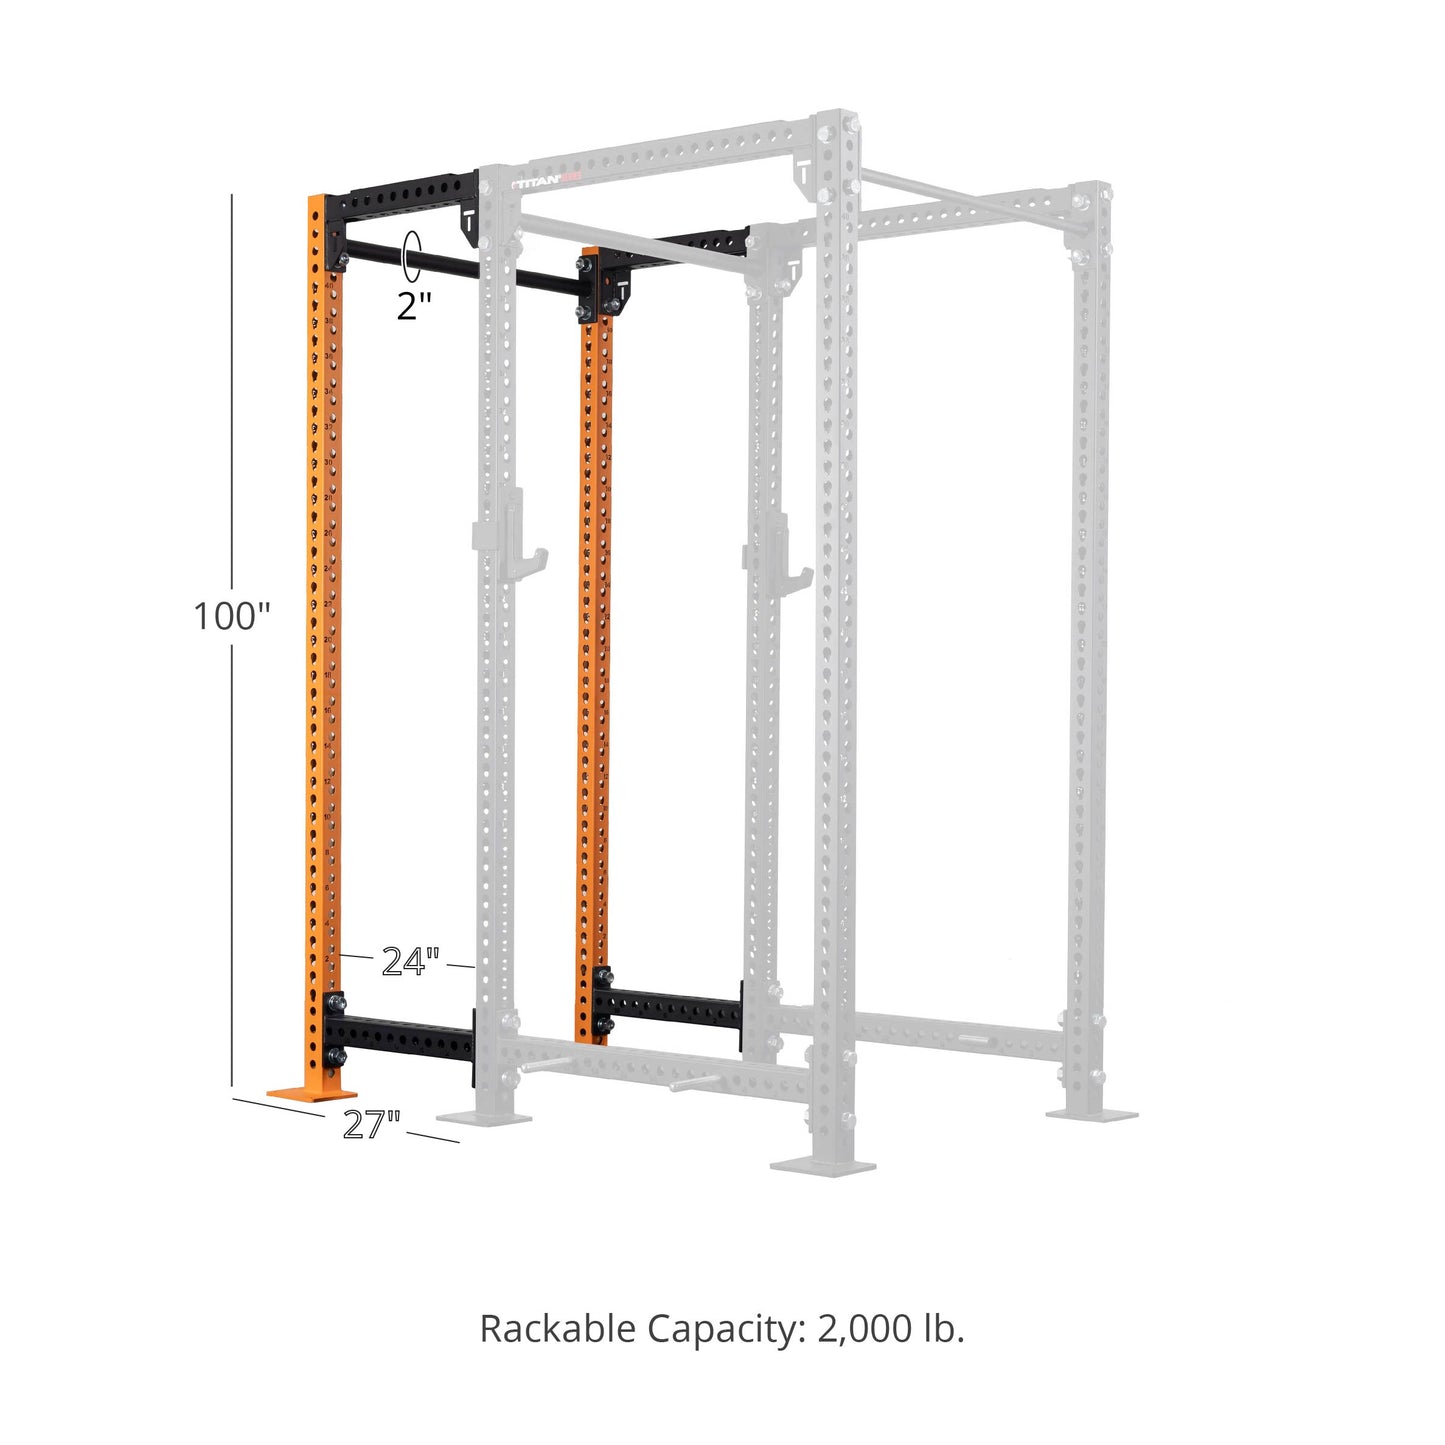 TITAN Series 24" Extension Kit - Extension Color: Orange - Extension Height: 100" - Crossmember: 2" Fat Pull-Up Bar | Orange / 100" / 2" Fat Pull-Up Bar - view 114